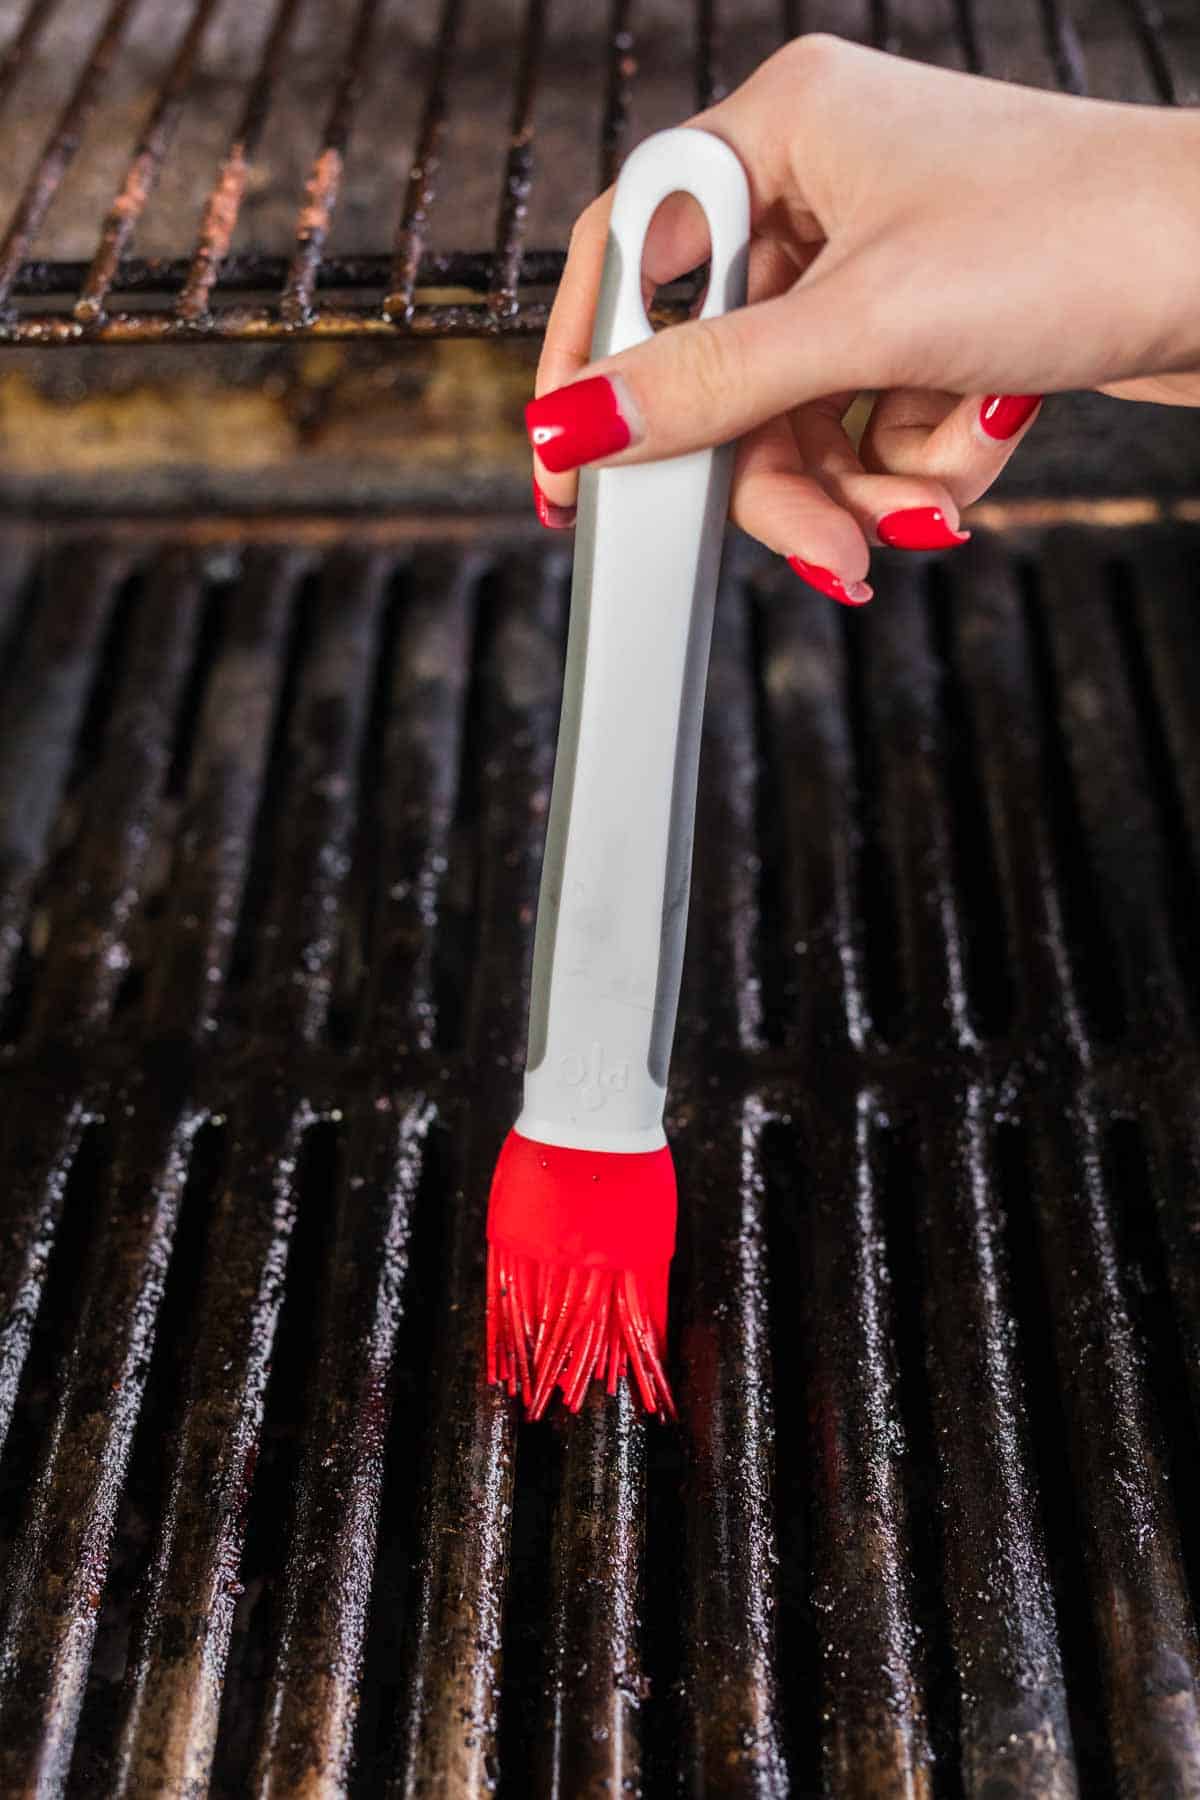 Brushing the oil on the grill grates